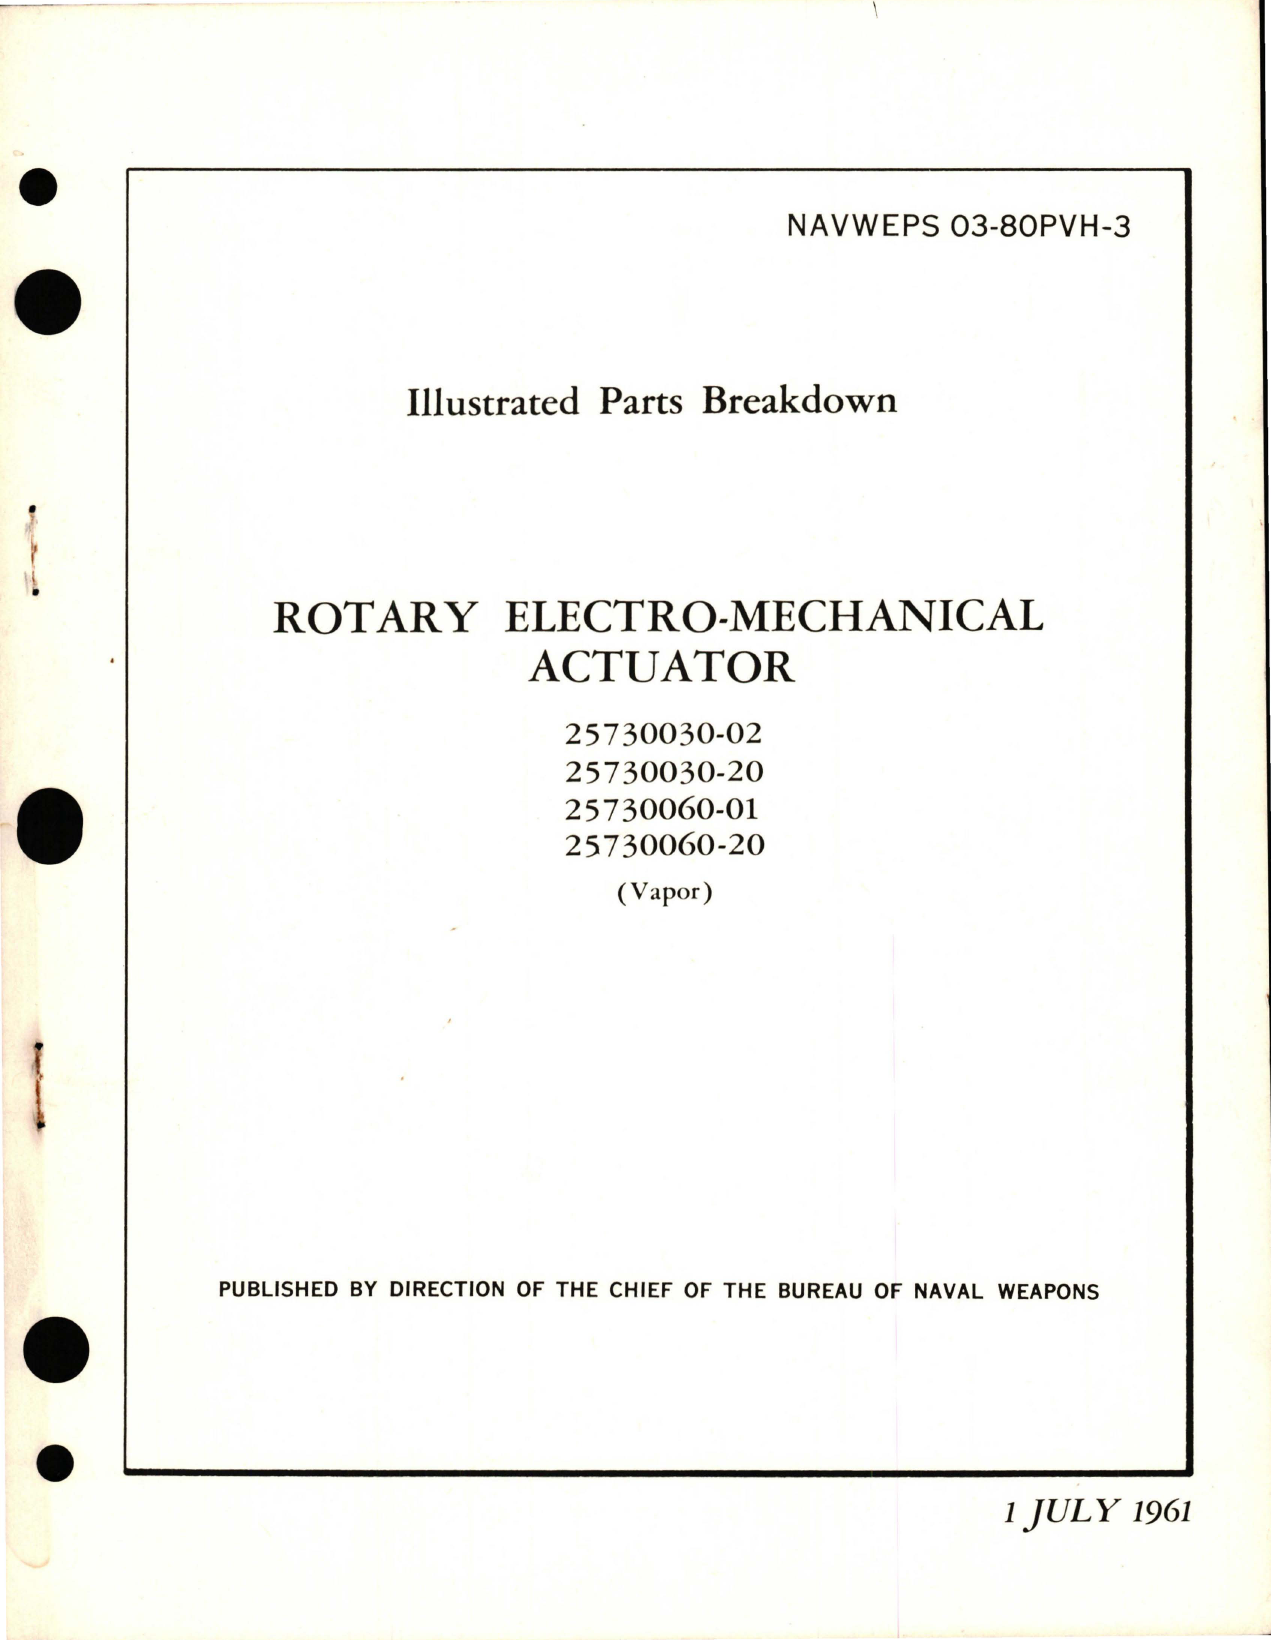 Sample page 1 from AirCorps Library document: Illustrated Parts Breakdown for Rotary Electro-Mechanical Actuator - Parts 25730030-02, 25730030-20, 25730060-01, and 25730060-20 